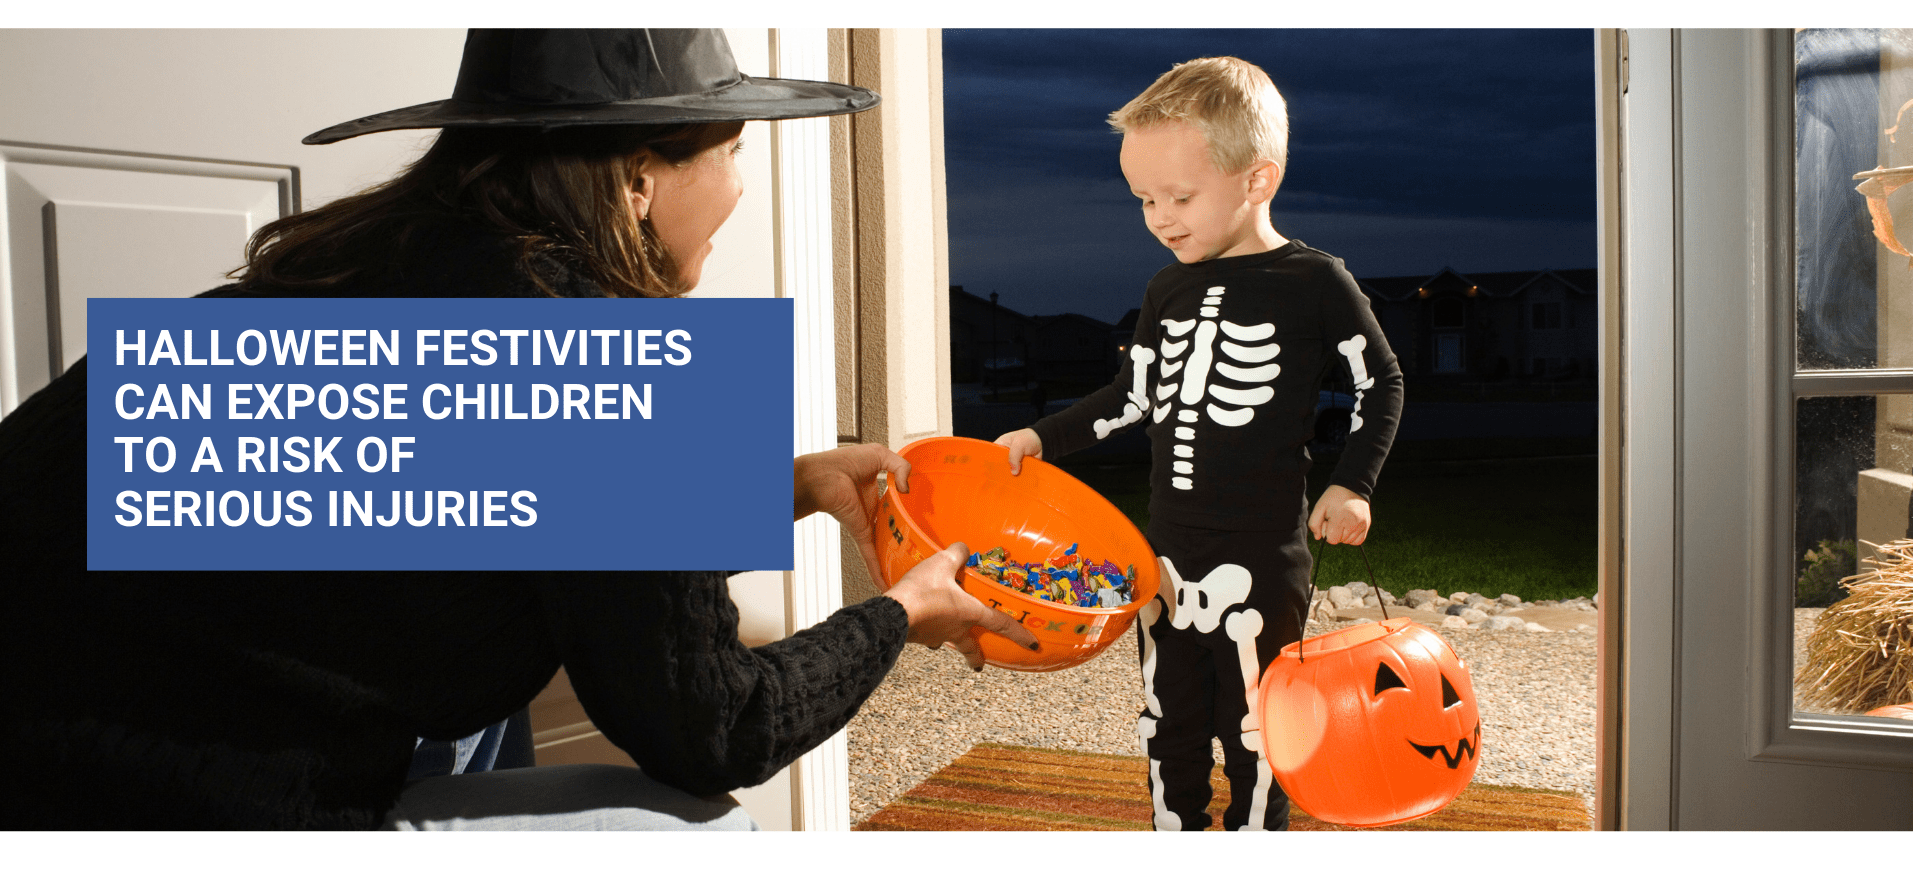 Halloween Festivities Can Expose Children to a Risk of Serious Injuries